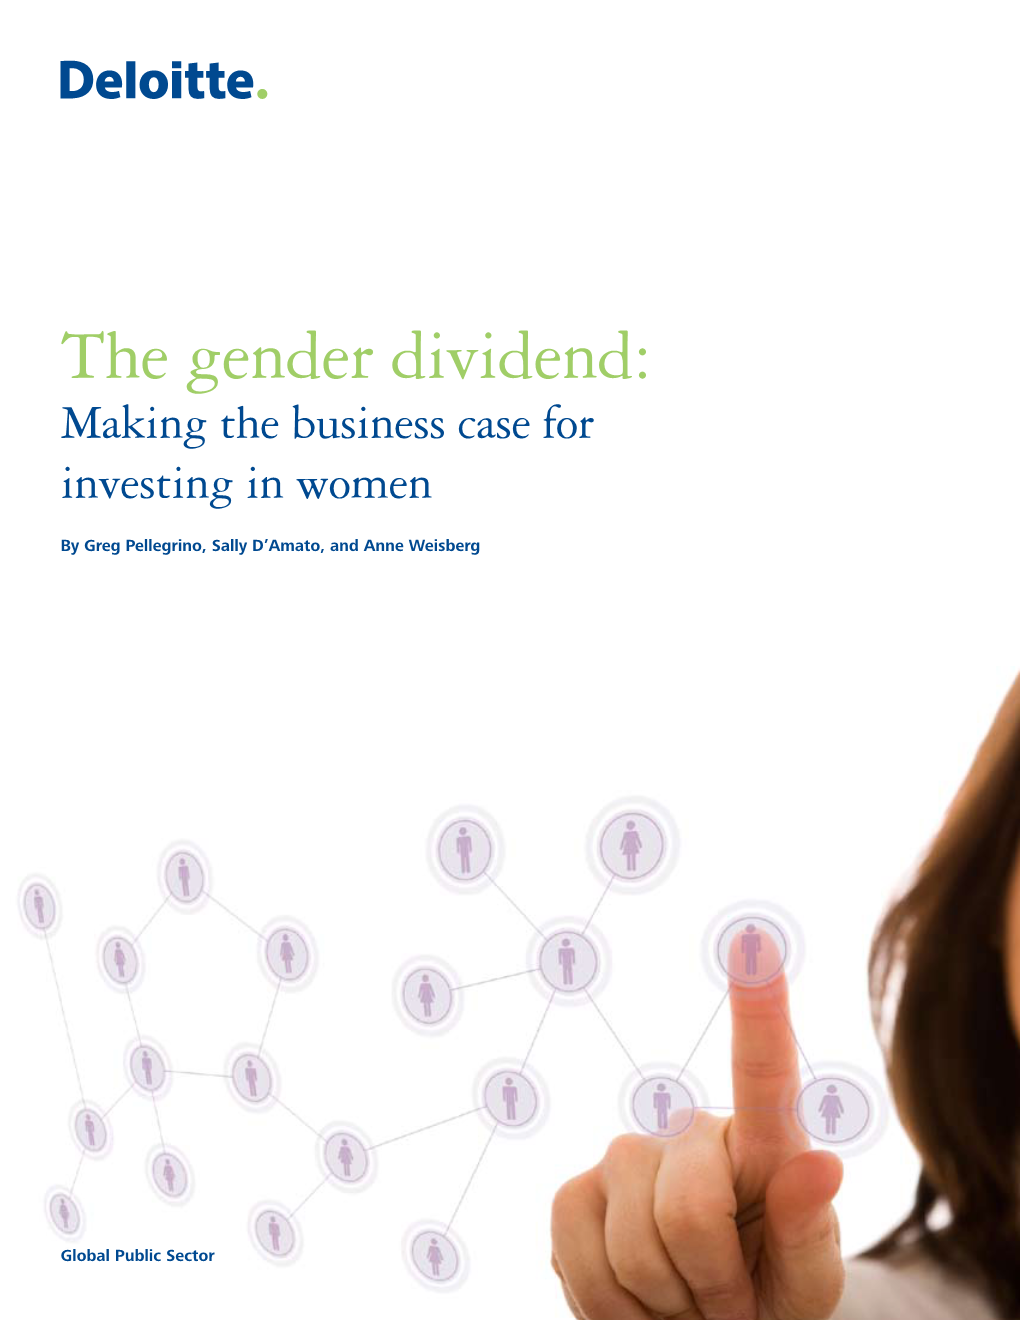 The Gender Dividend: Making the Business Case for Investing in Women